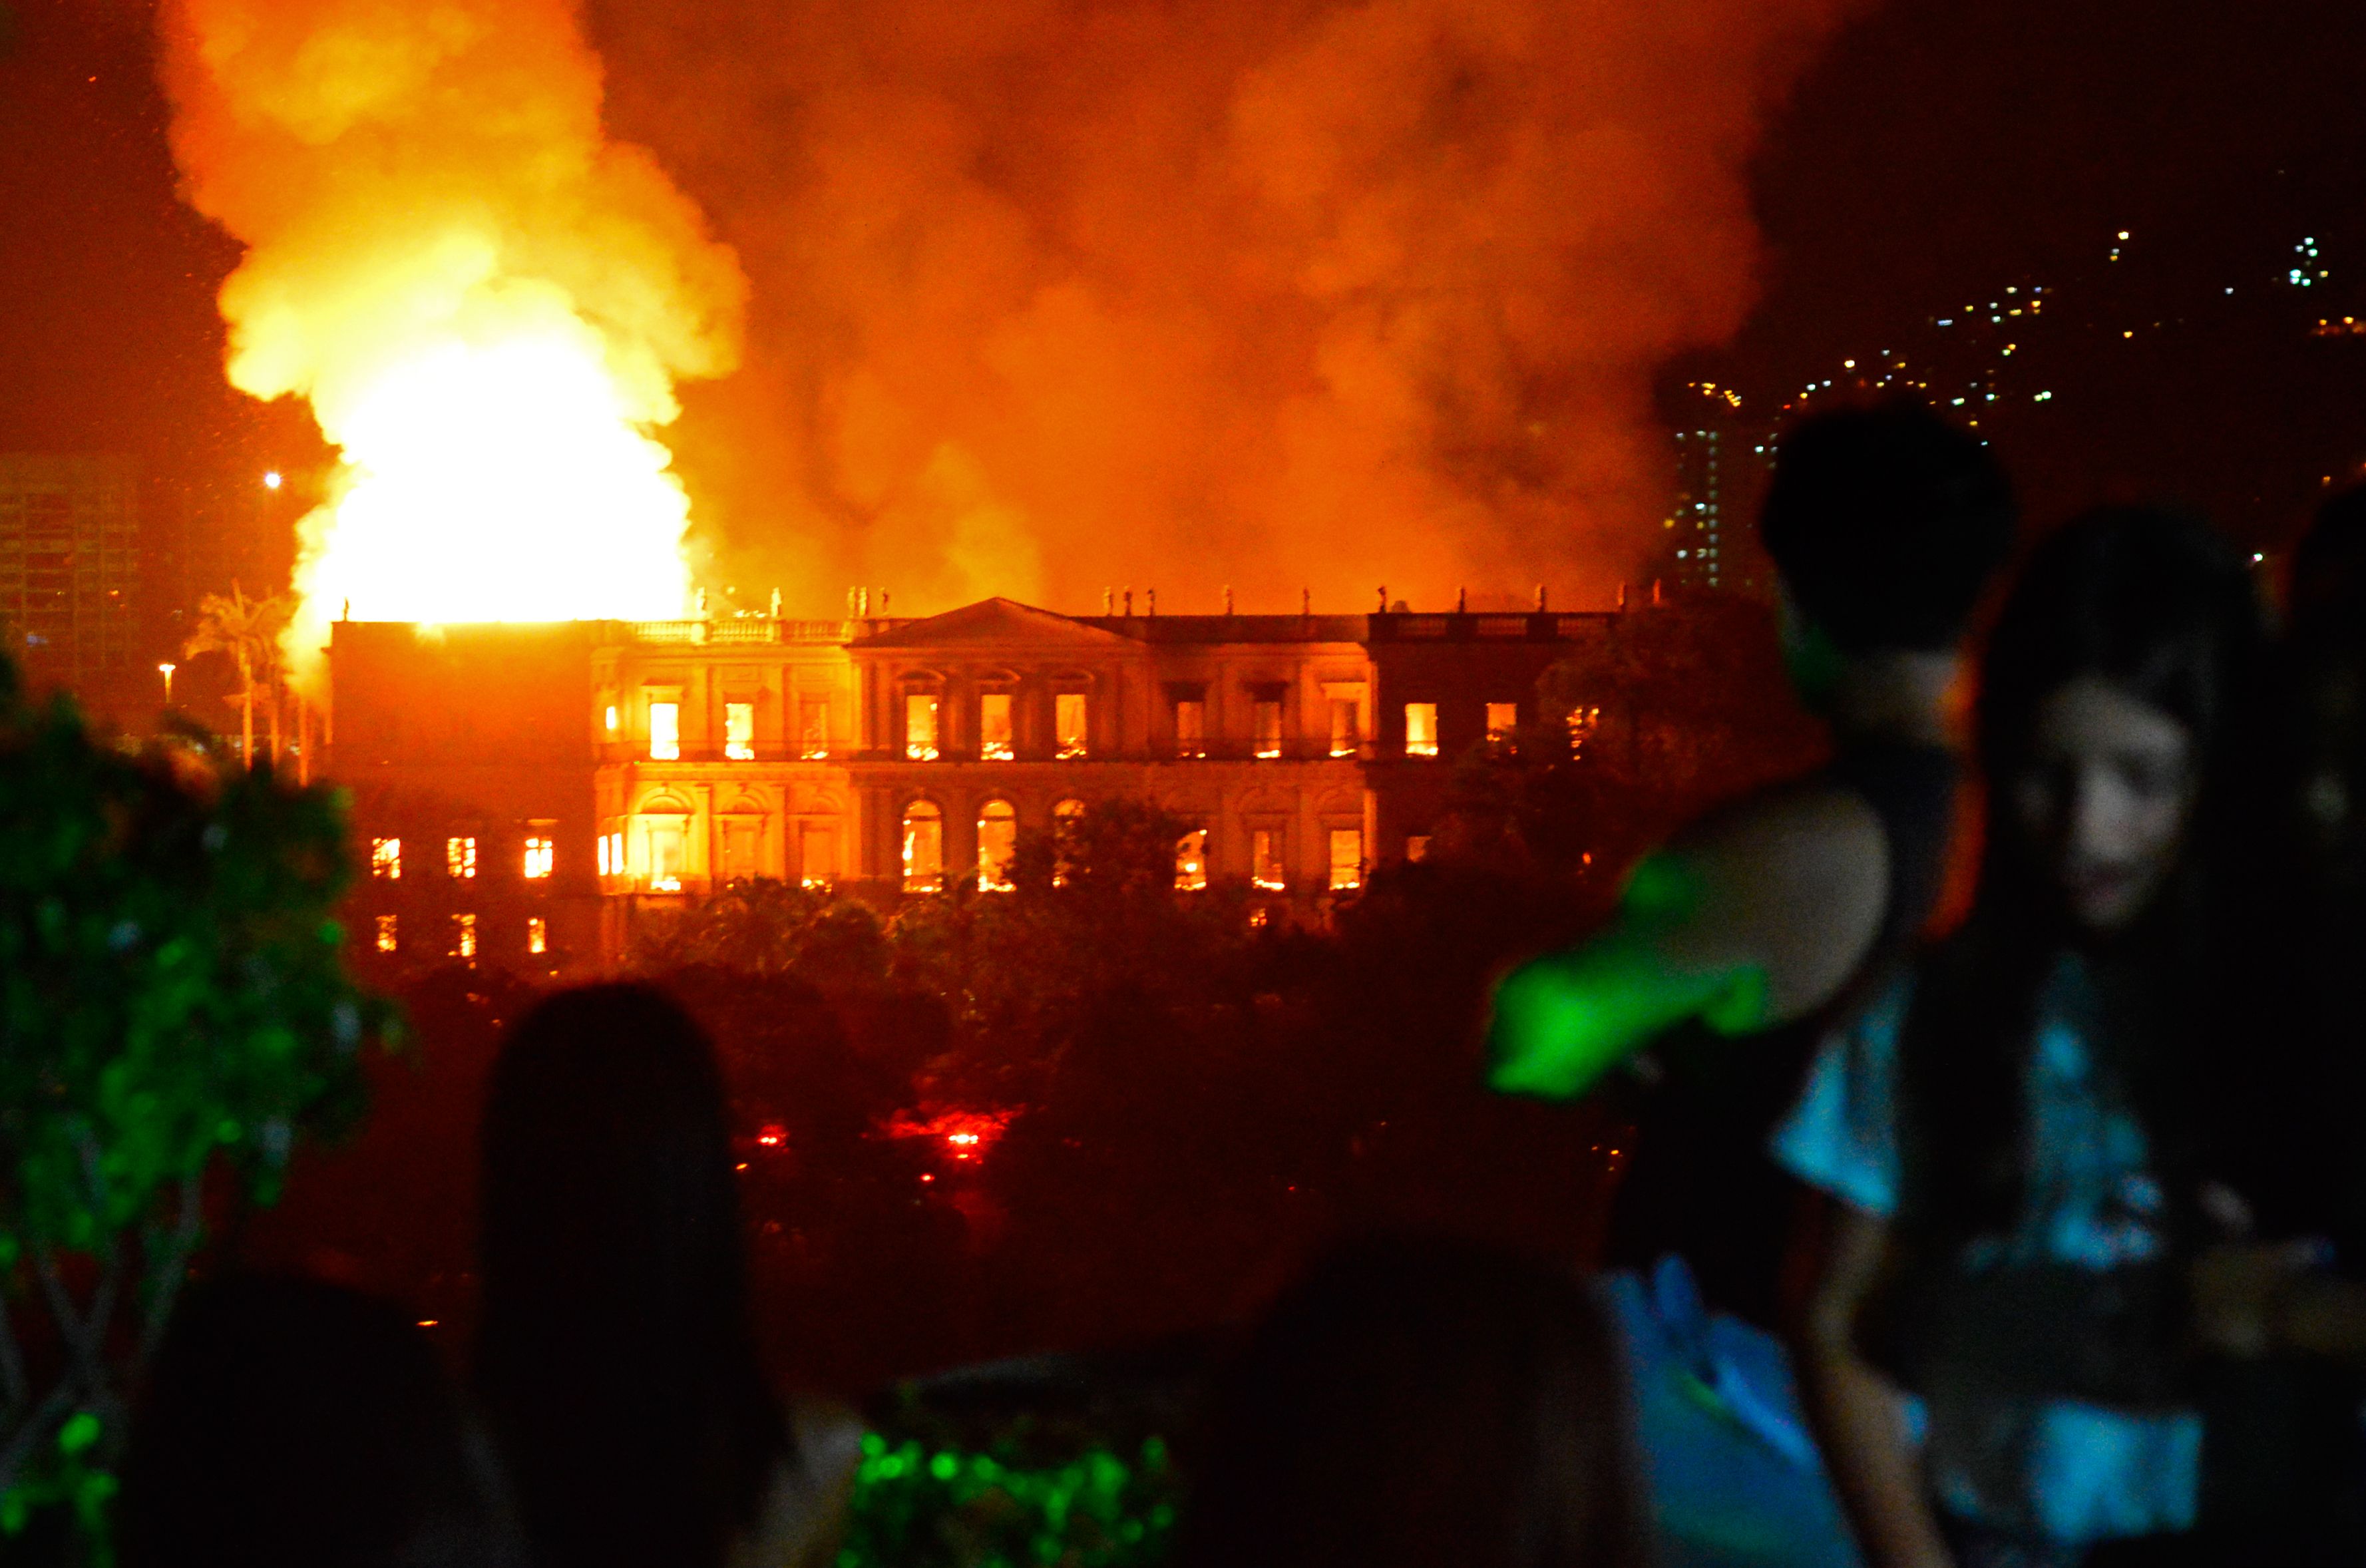 People watch as a massive fire engulfs the National Museum in Rio de Janeiro in Brazil on Sept. 2, 2018. (STR—AFP/Getty Images)